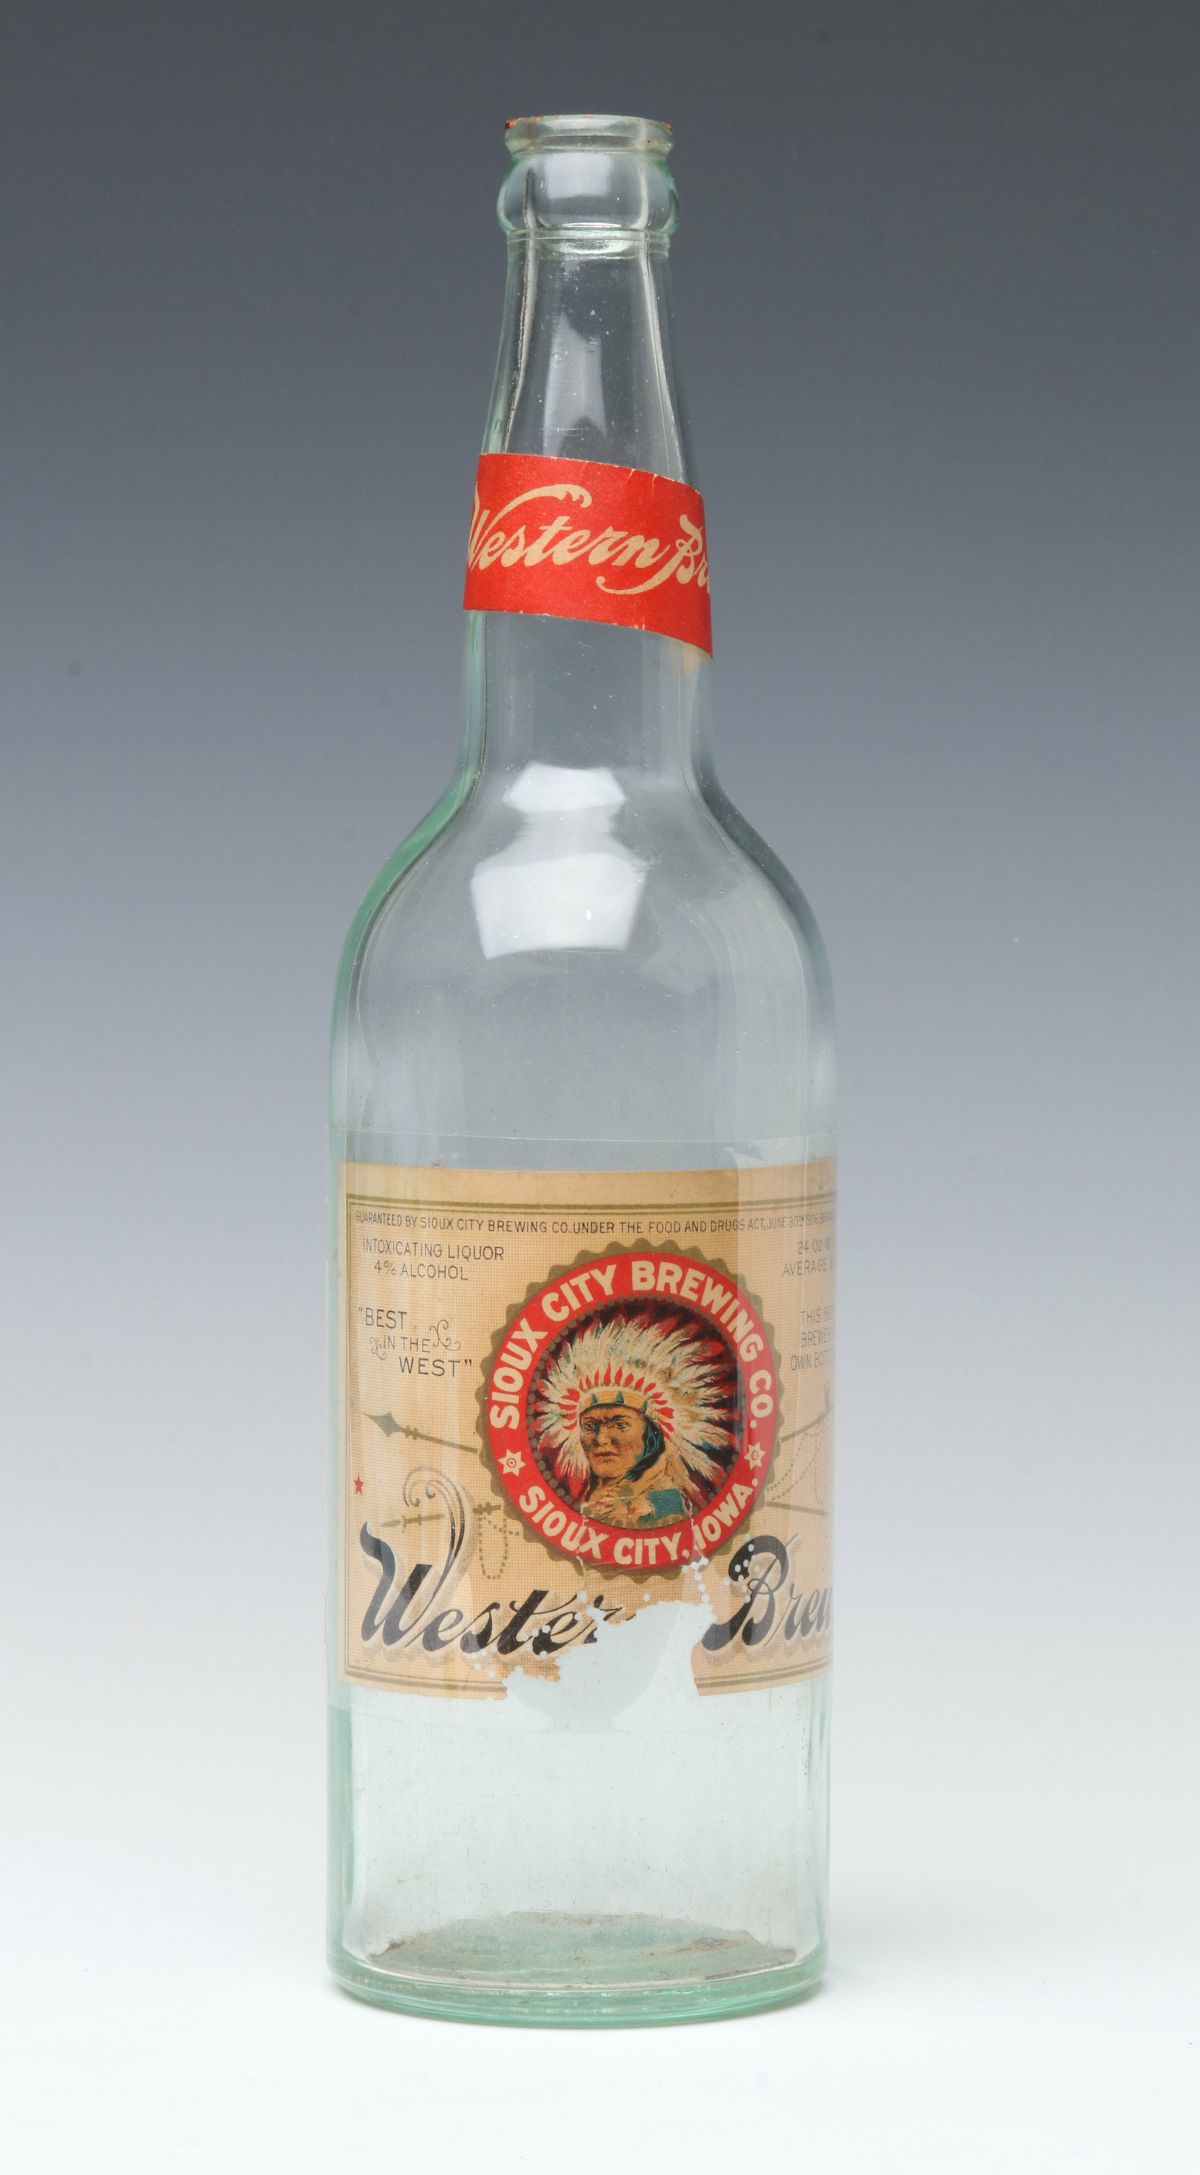 PRE-PROHIBITION SIOUX CITY BEER BOTTLE WITH LABEL